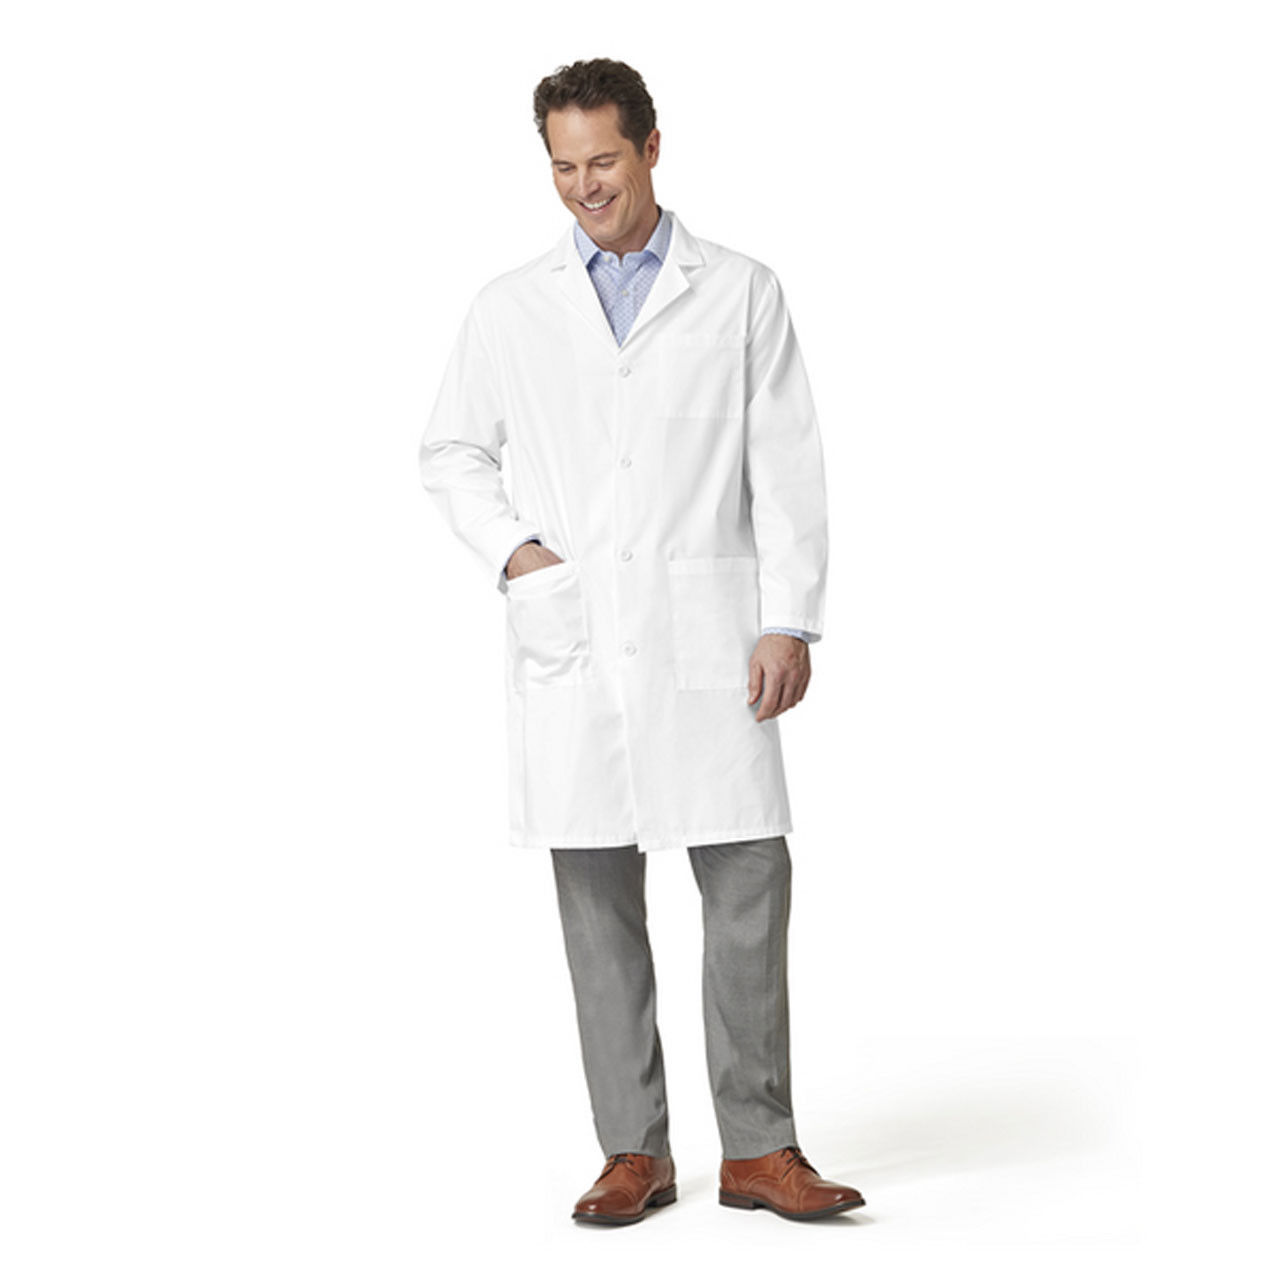 Is it possible to purchase Unisex Lab Coats by Fashion Seal in lab coats bulk?